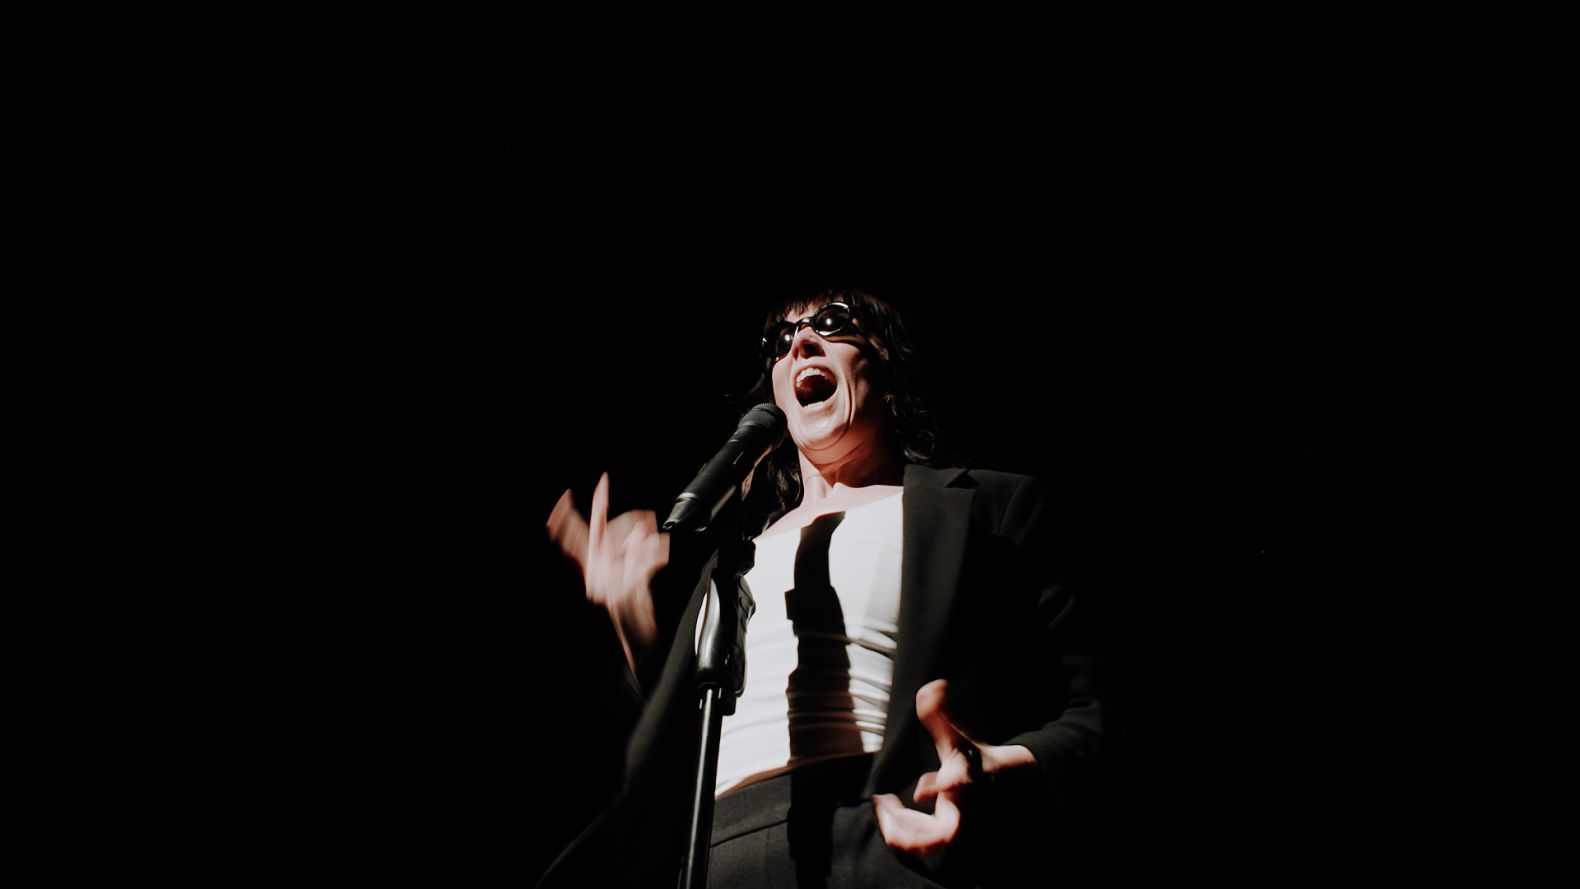 performer in black and white suit screams into microphone wearing sunglasses